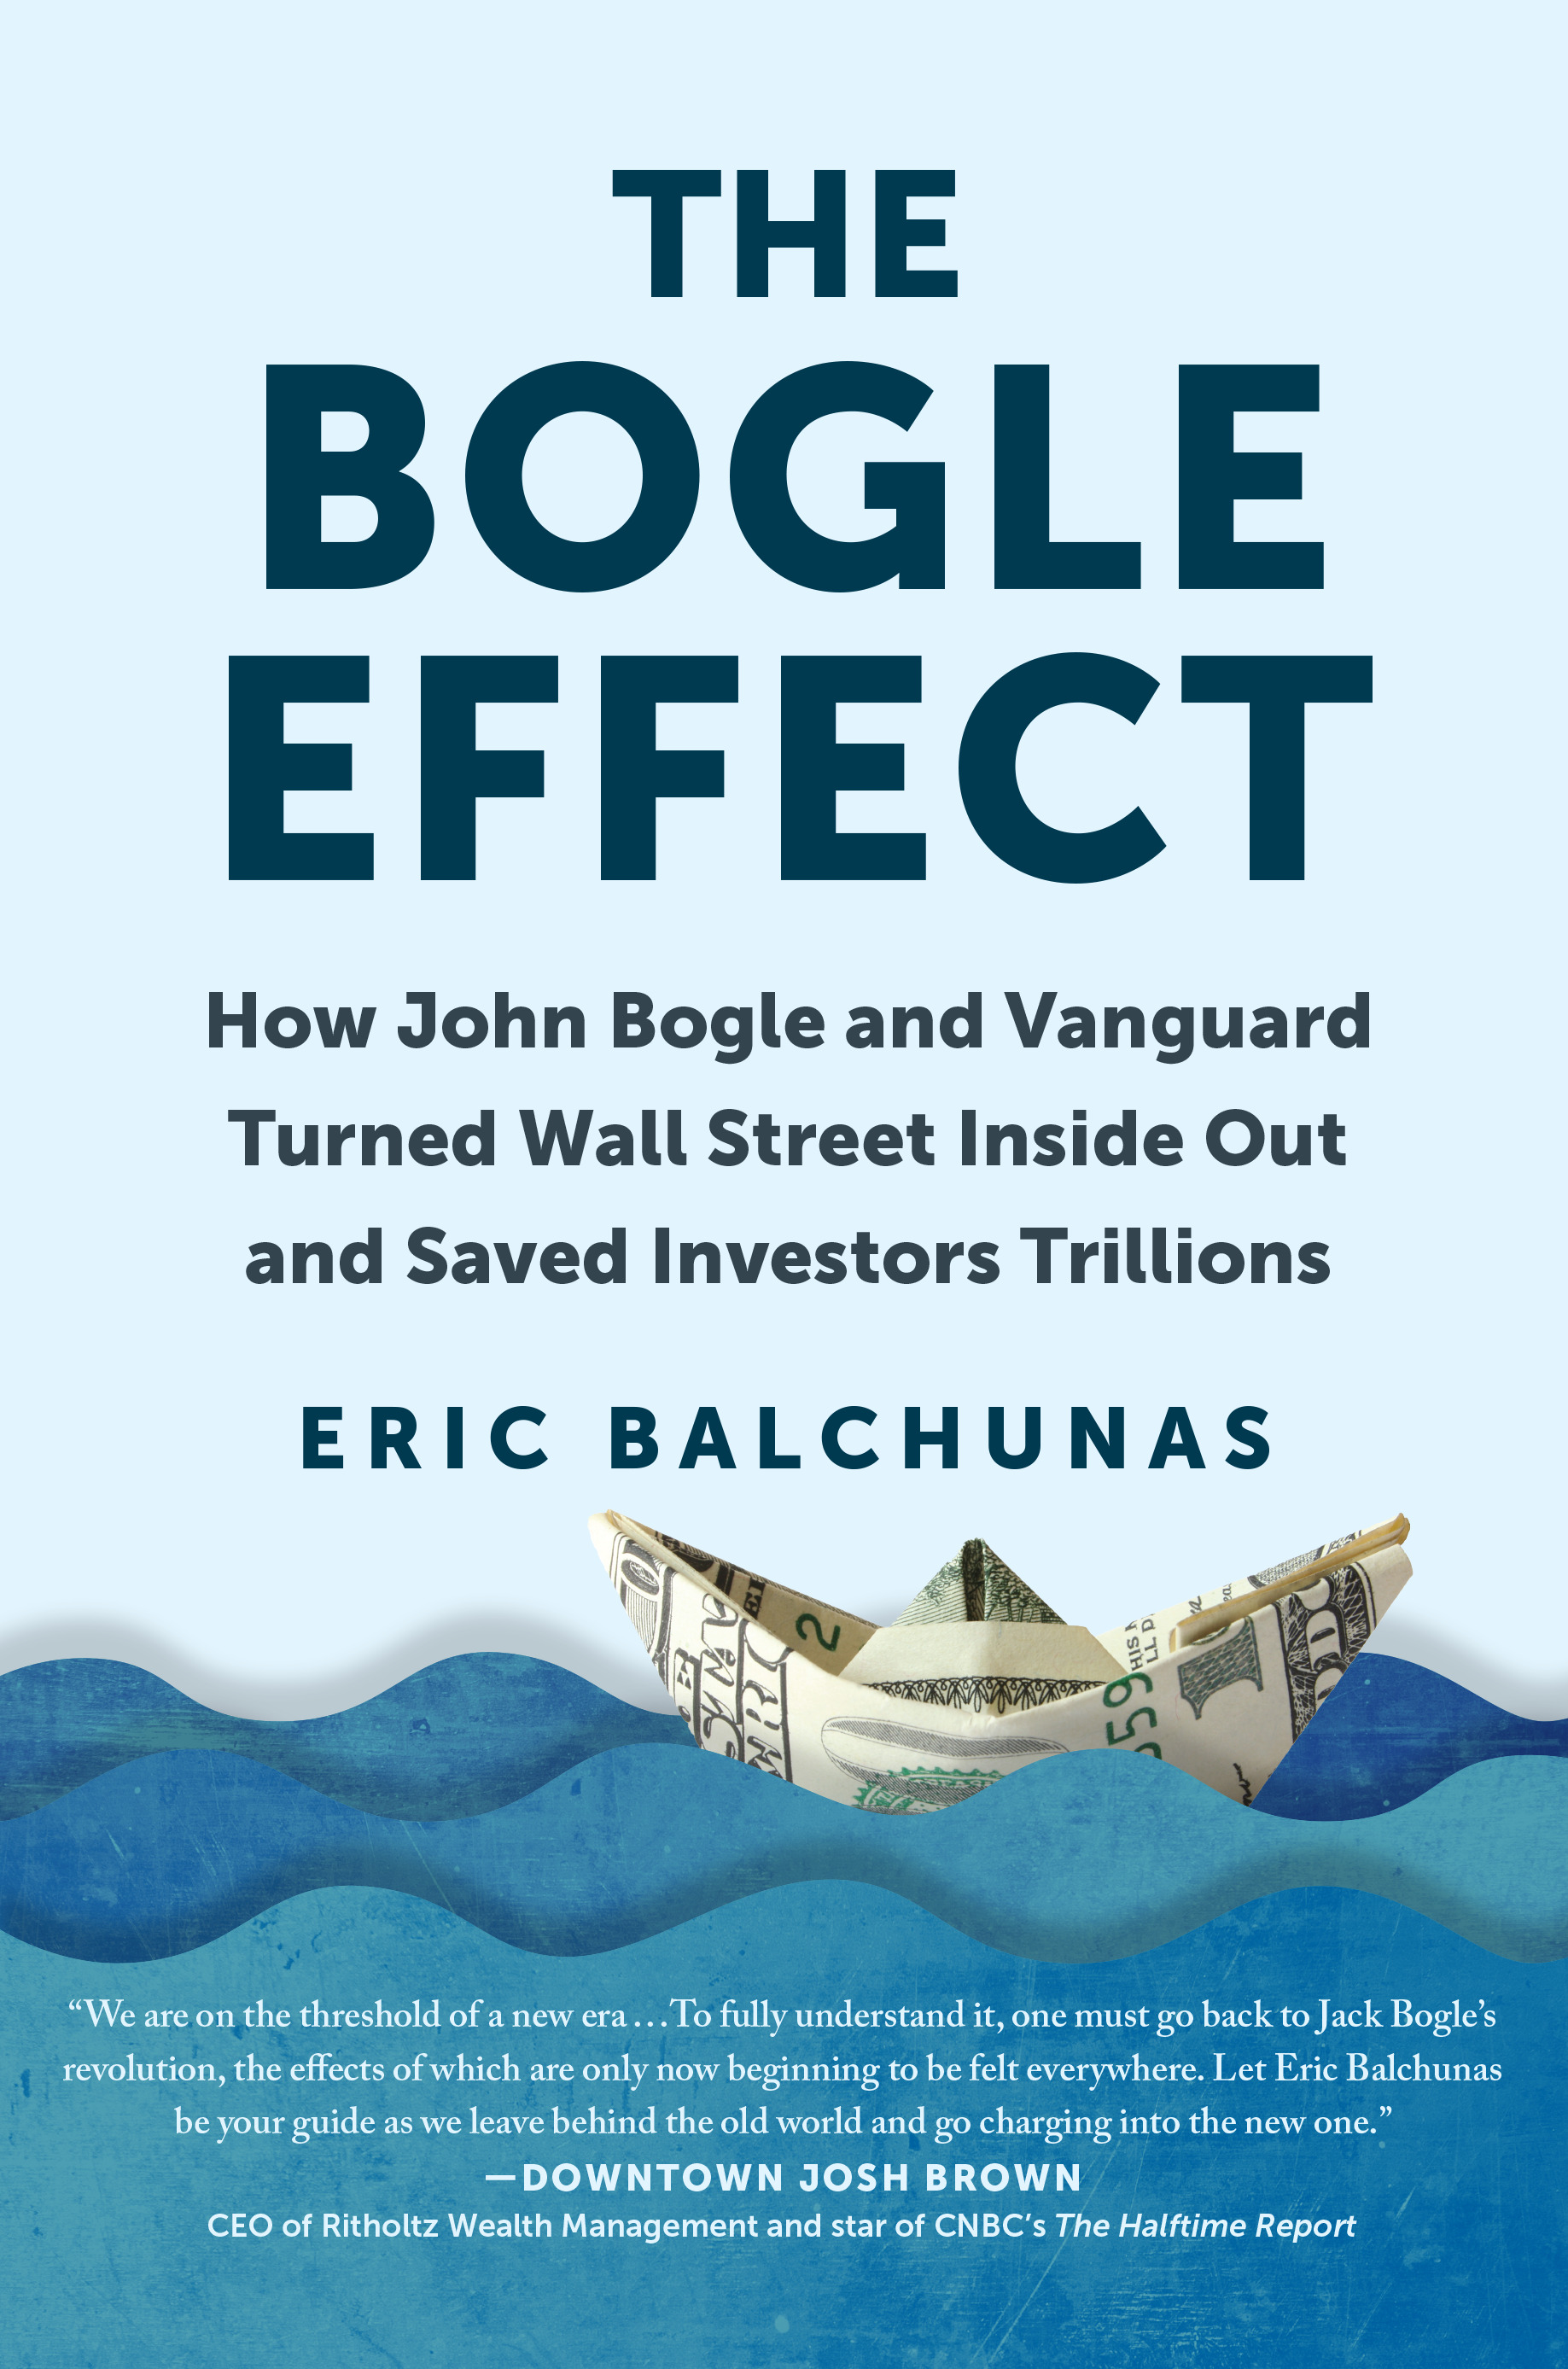 The Bogle Effect : How John Bogle and Vanguard Turned Wall Street Inside Out and Saved Investors Trillions | Business & Management